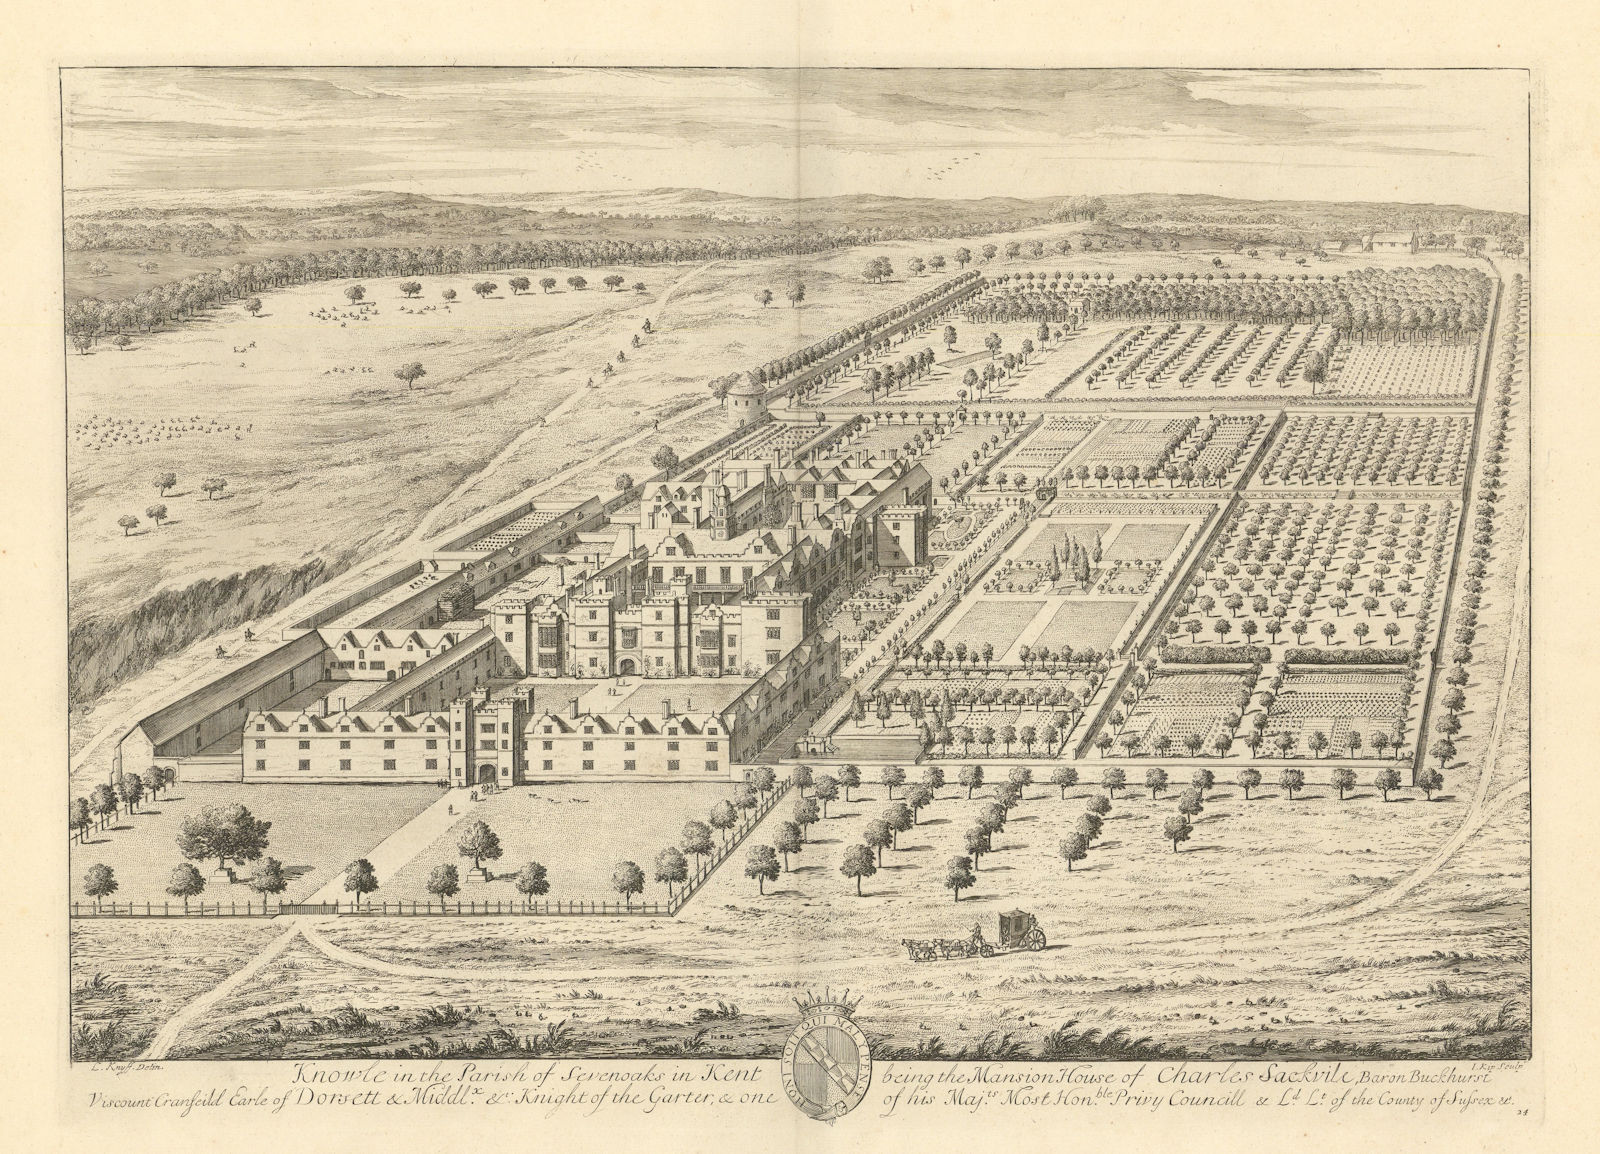 Knole House by Kip & Knyff. "Knowle in the Parish of Sevenoaks in Kent" 1709